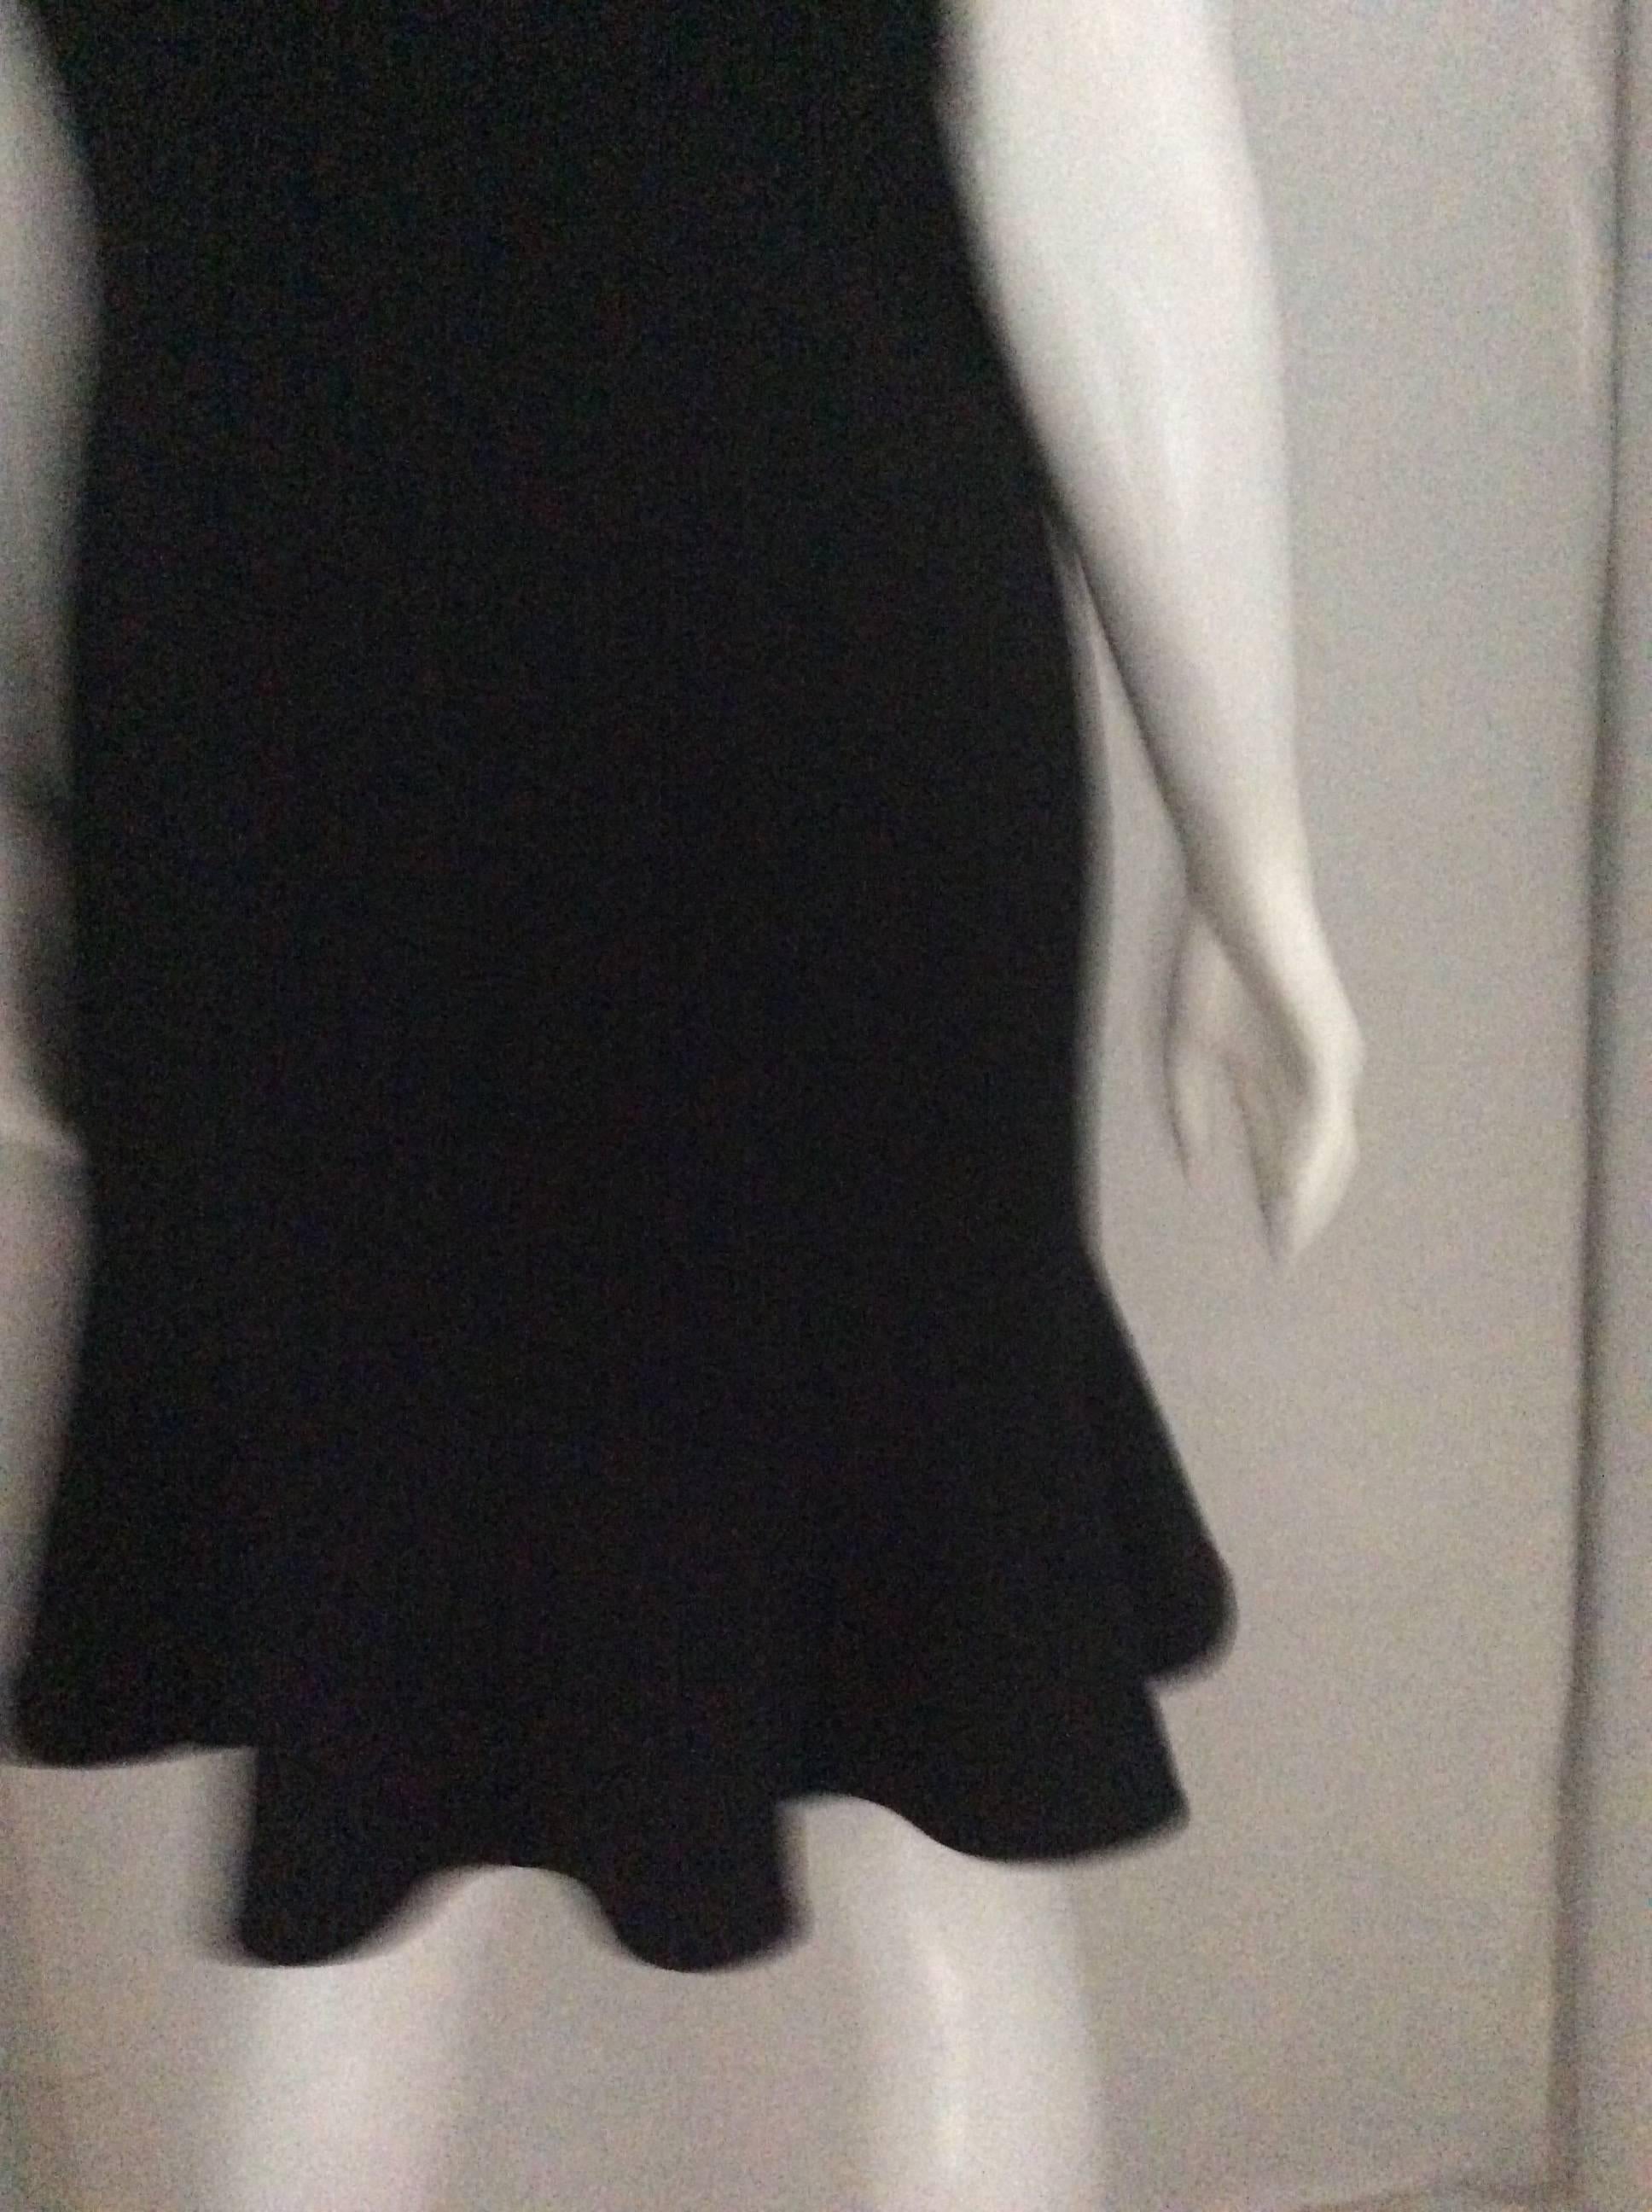 Ralph Lauren Black Label Sleeveless Dress - New With Tags In New Condition For Sale In Boca Raton, FL